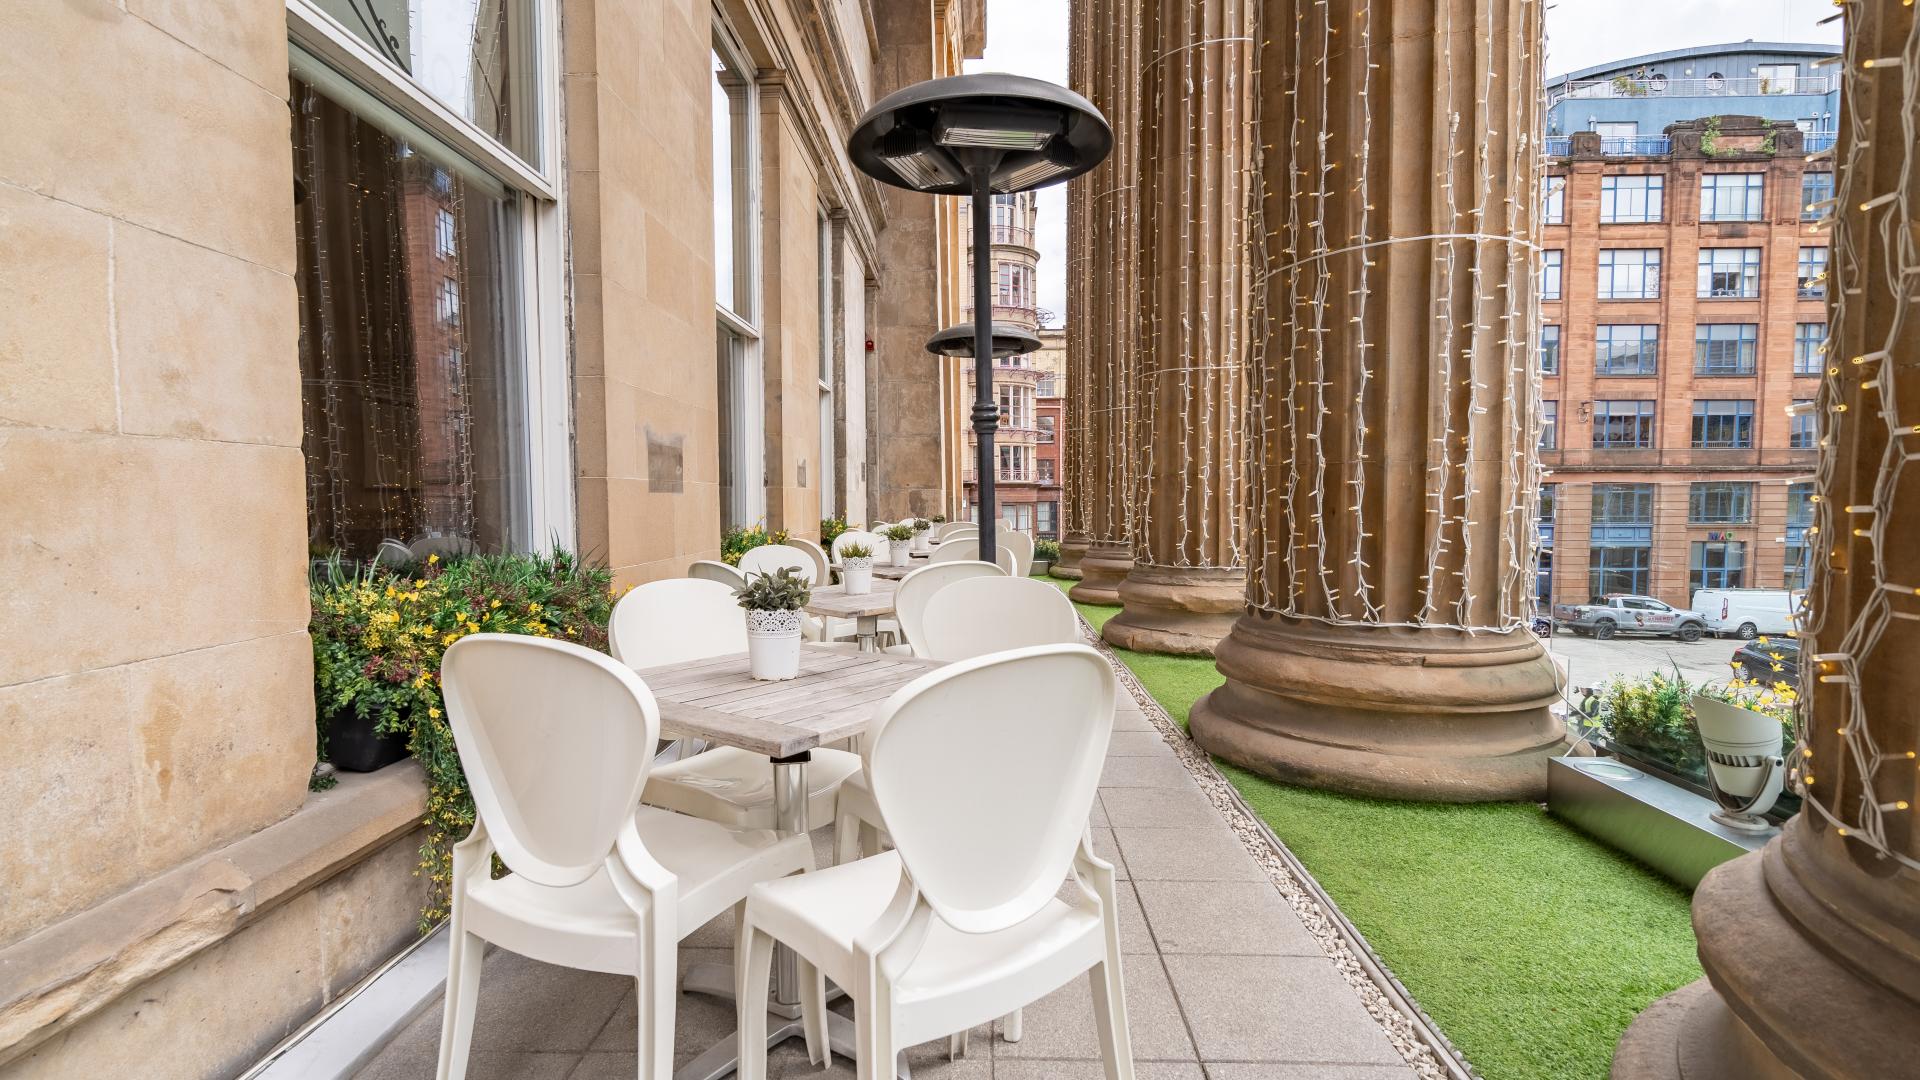 Outdoor Venues for Hire in Glasgow